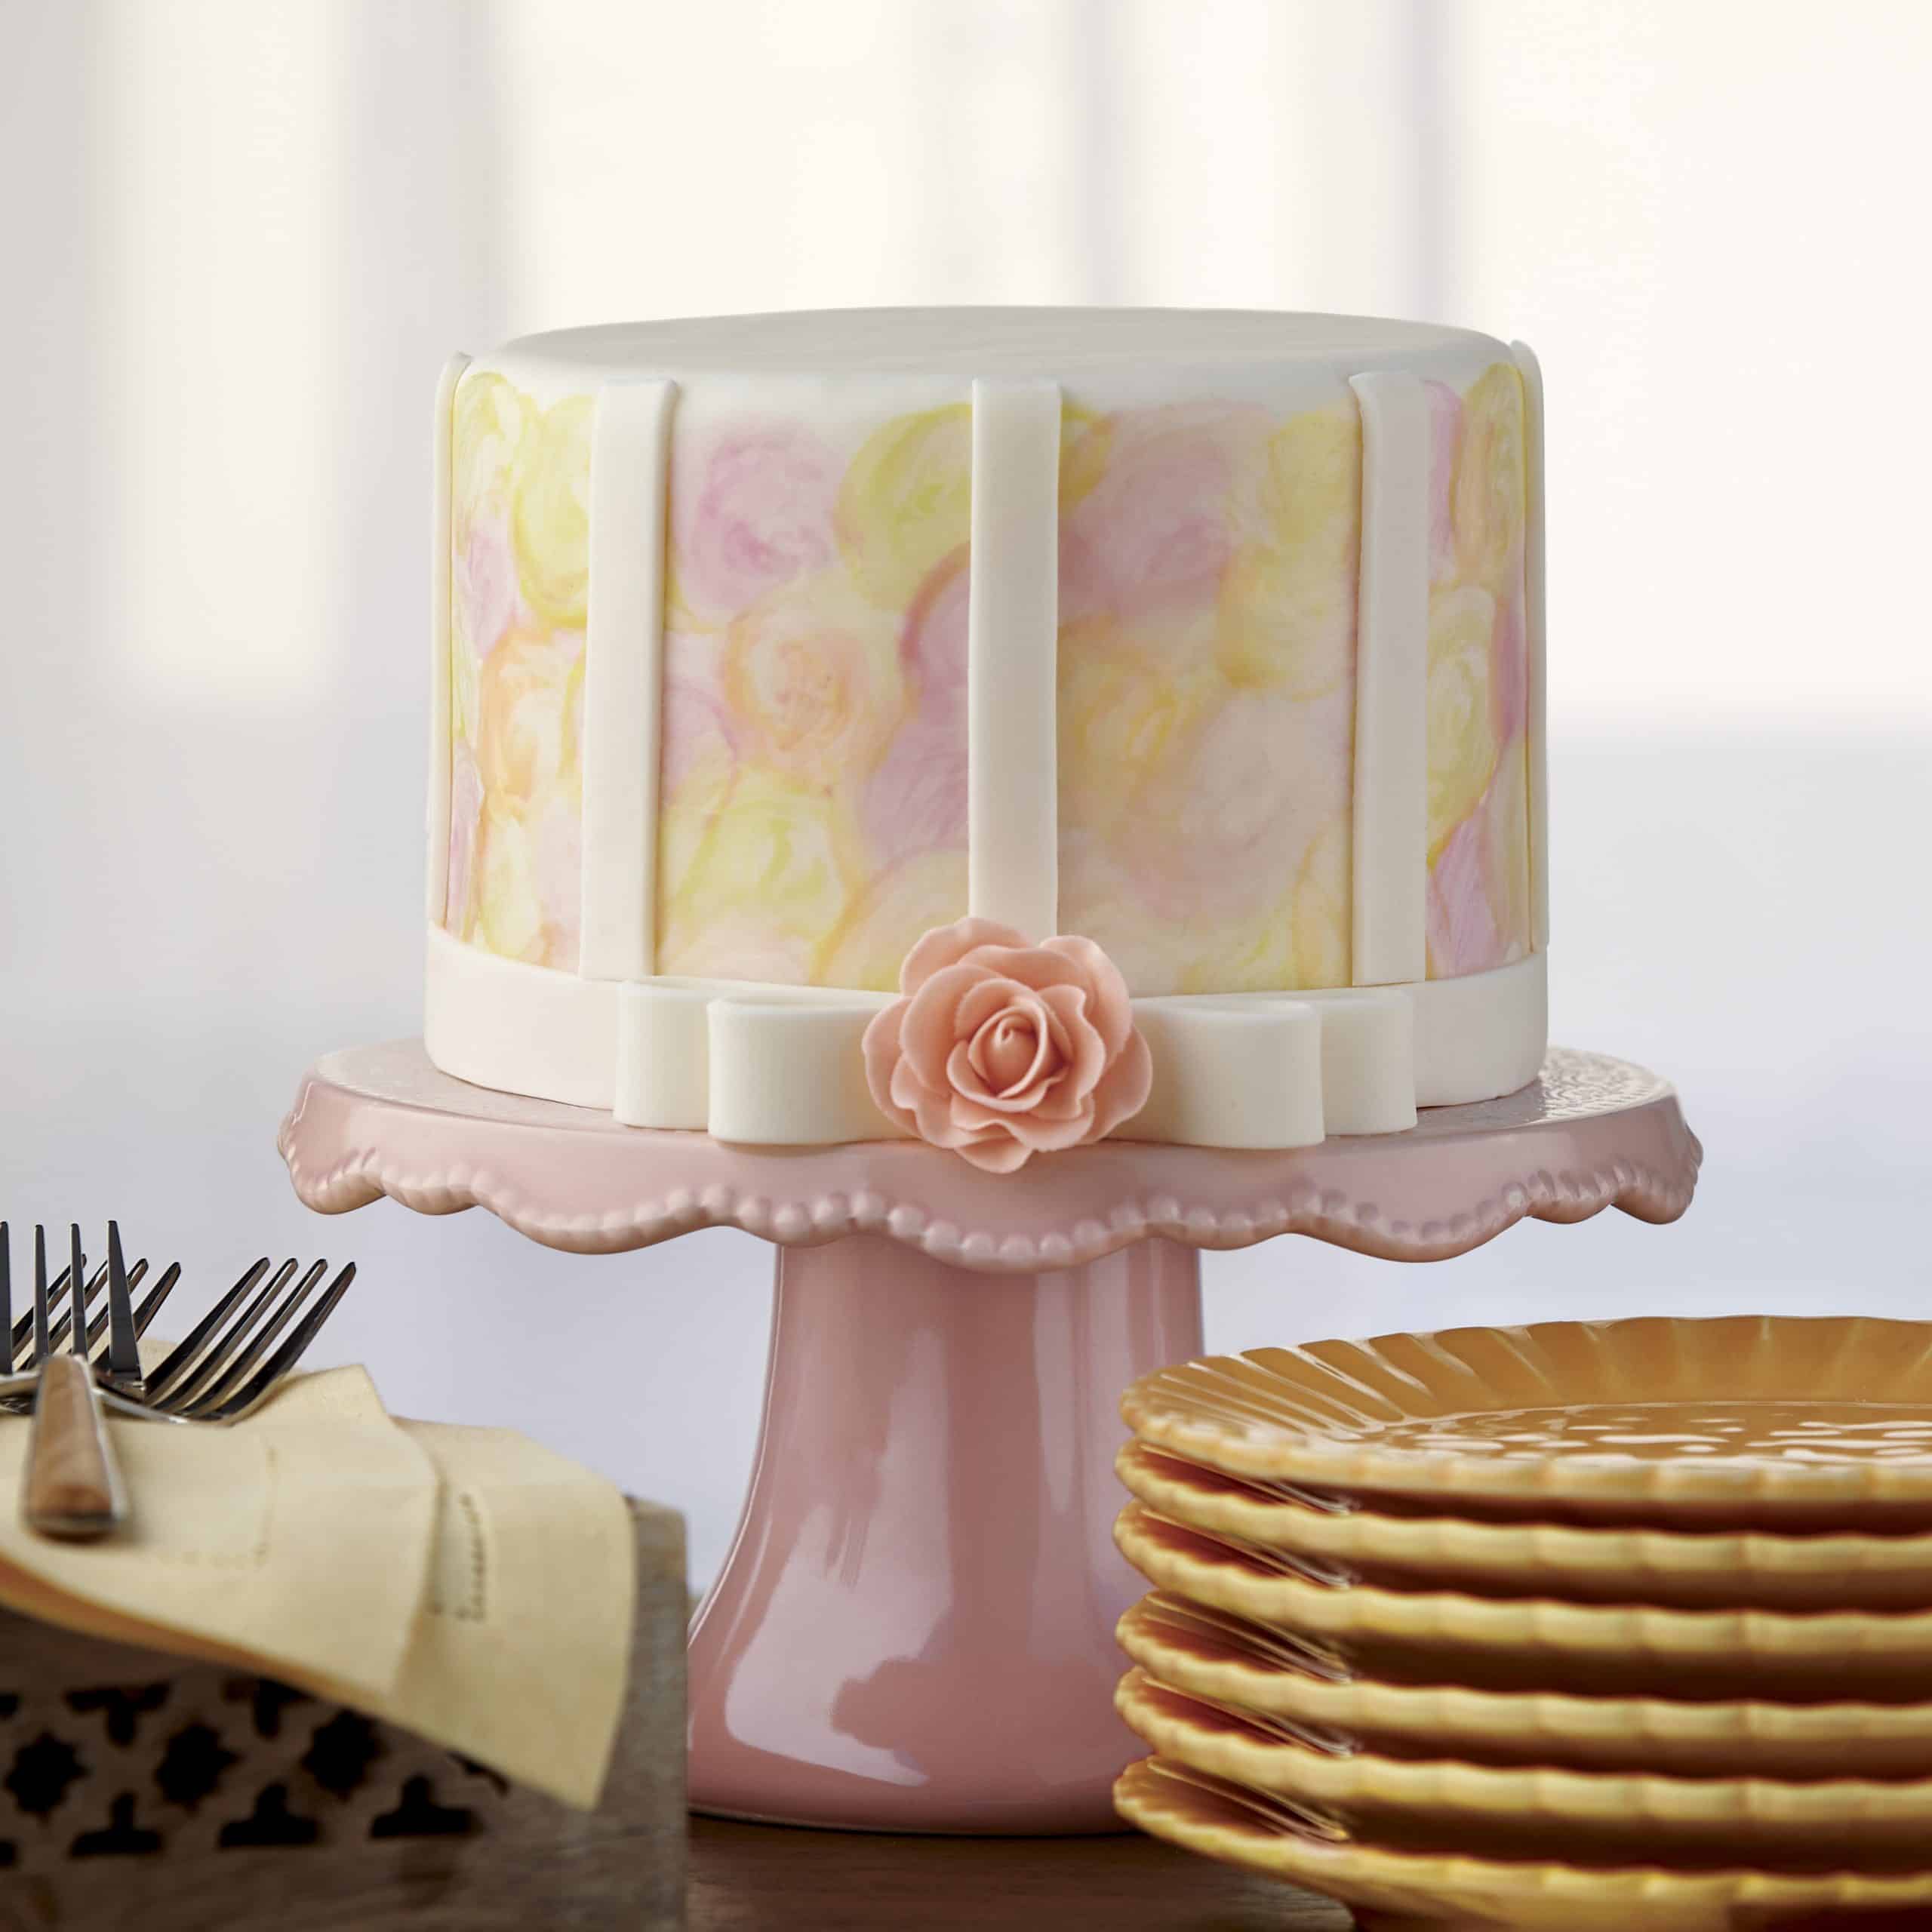 Learn to decorate a cake with a Wilton Method Class